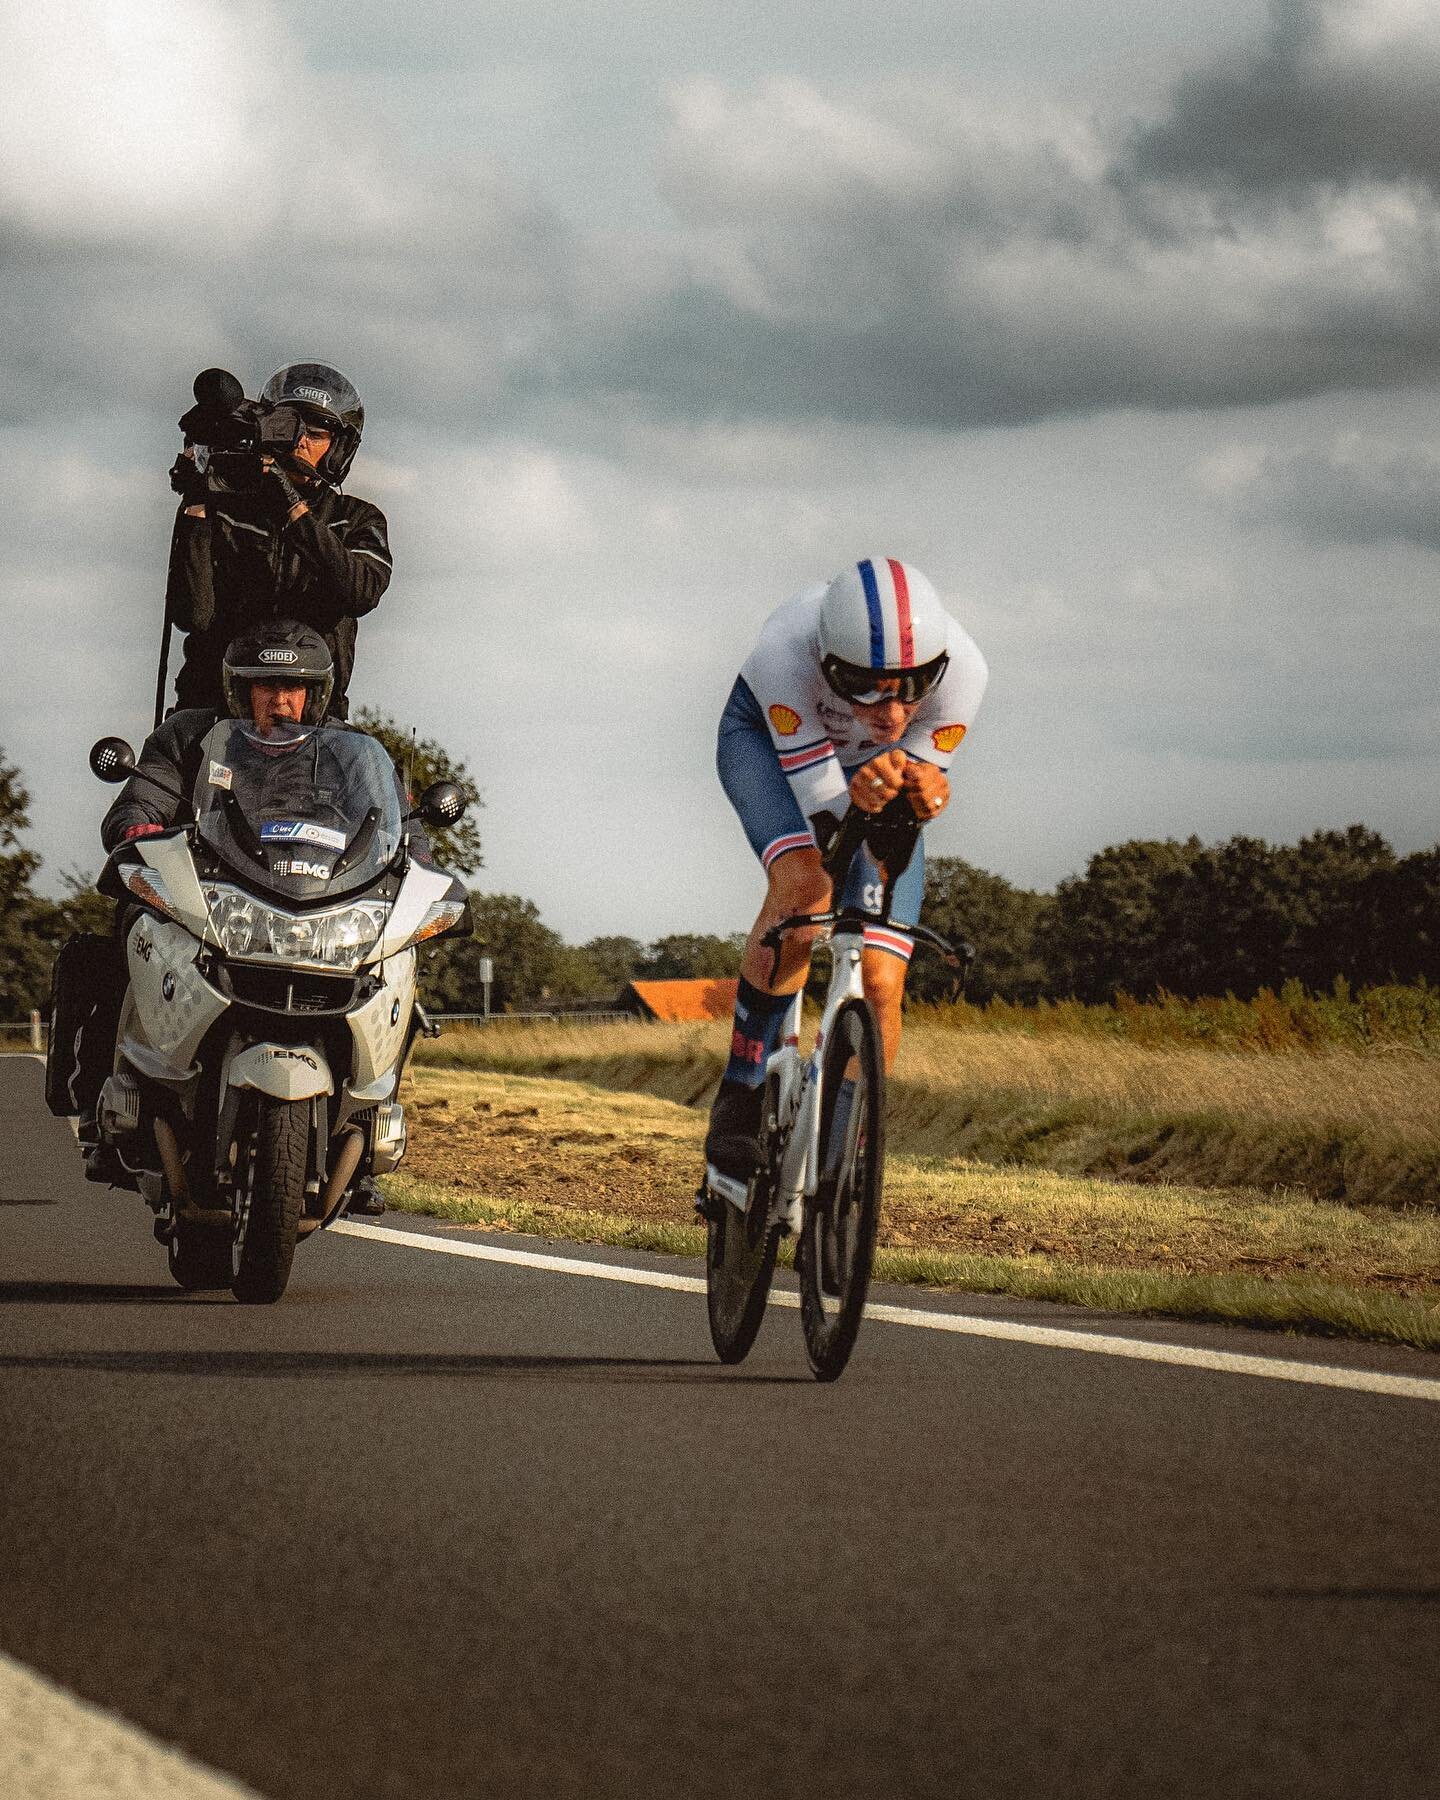 Today a great opportunity to see how its done&hellip;🤔😬🤪🚴&zwj;♀️

#EK_wielrennen #woutvanaert🇧🇪 #joshuatarling🇬🇧 #wielrennen #cycling #jumbovisma #bikelife #uec_cycling #drenthe #cyclelife #timetrailbike #wielersport